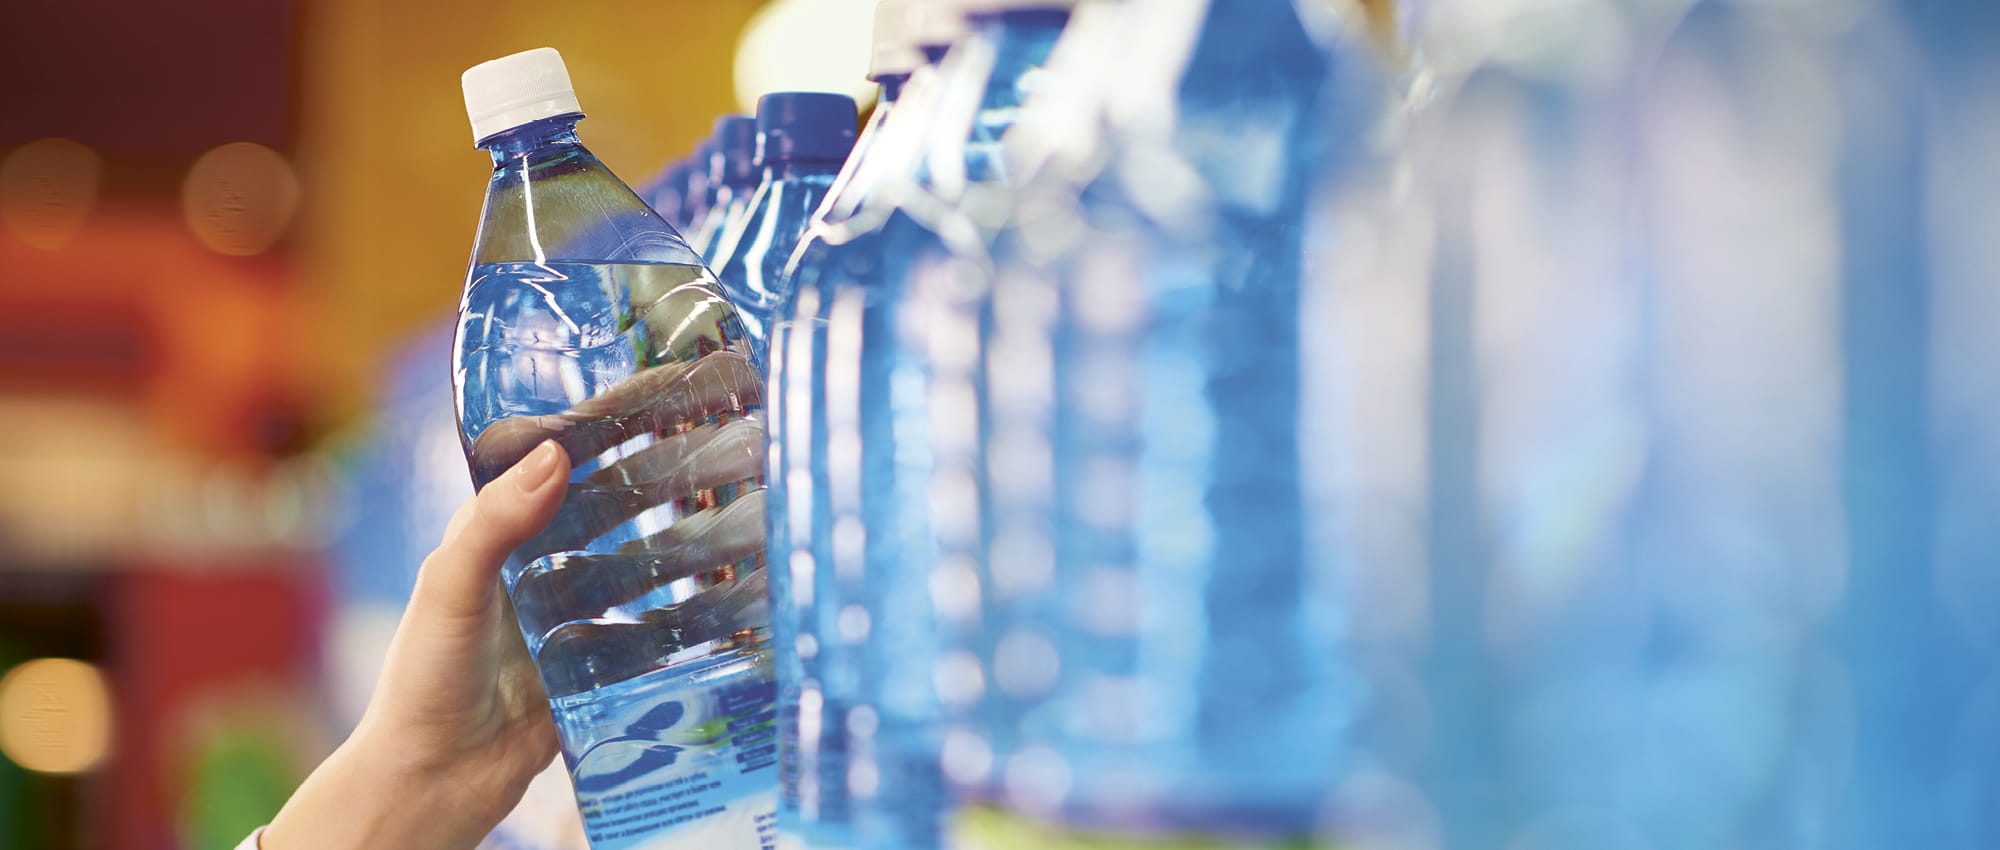 A water bottle is grabbed from a shelf. Copyright: iStock / mediaphotos